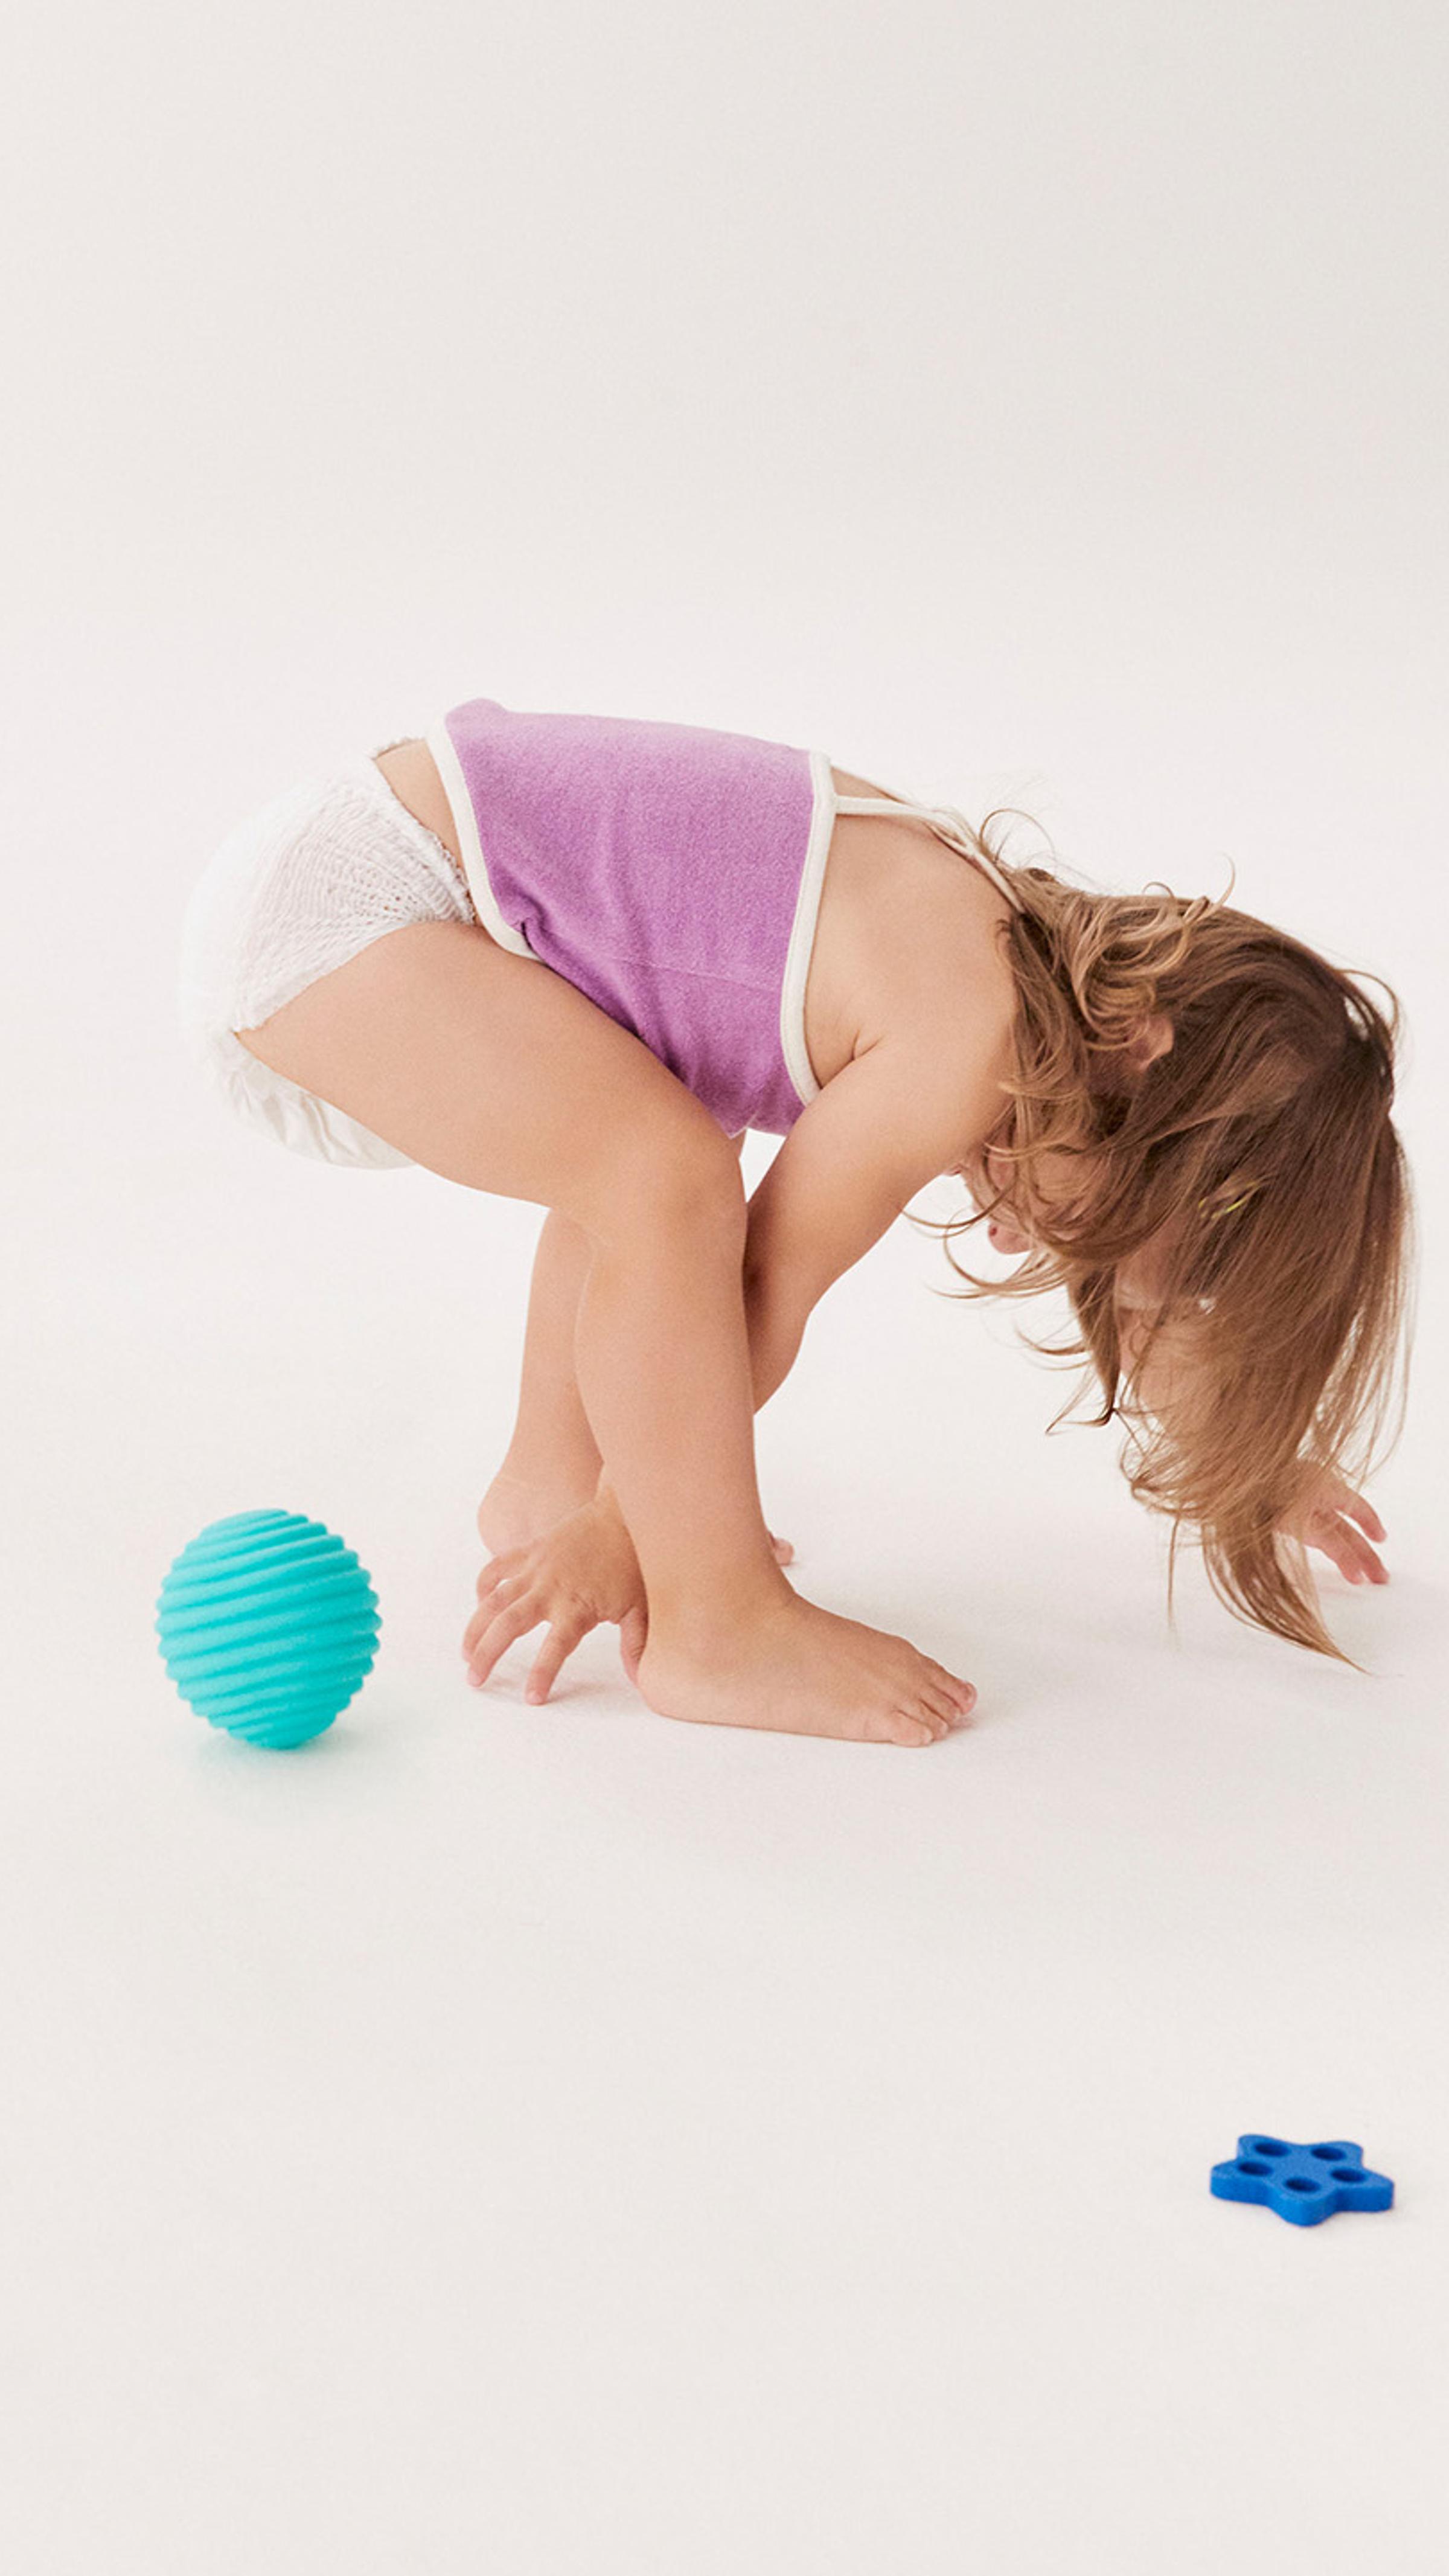 A child playing with a ball.